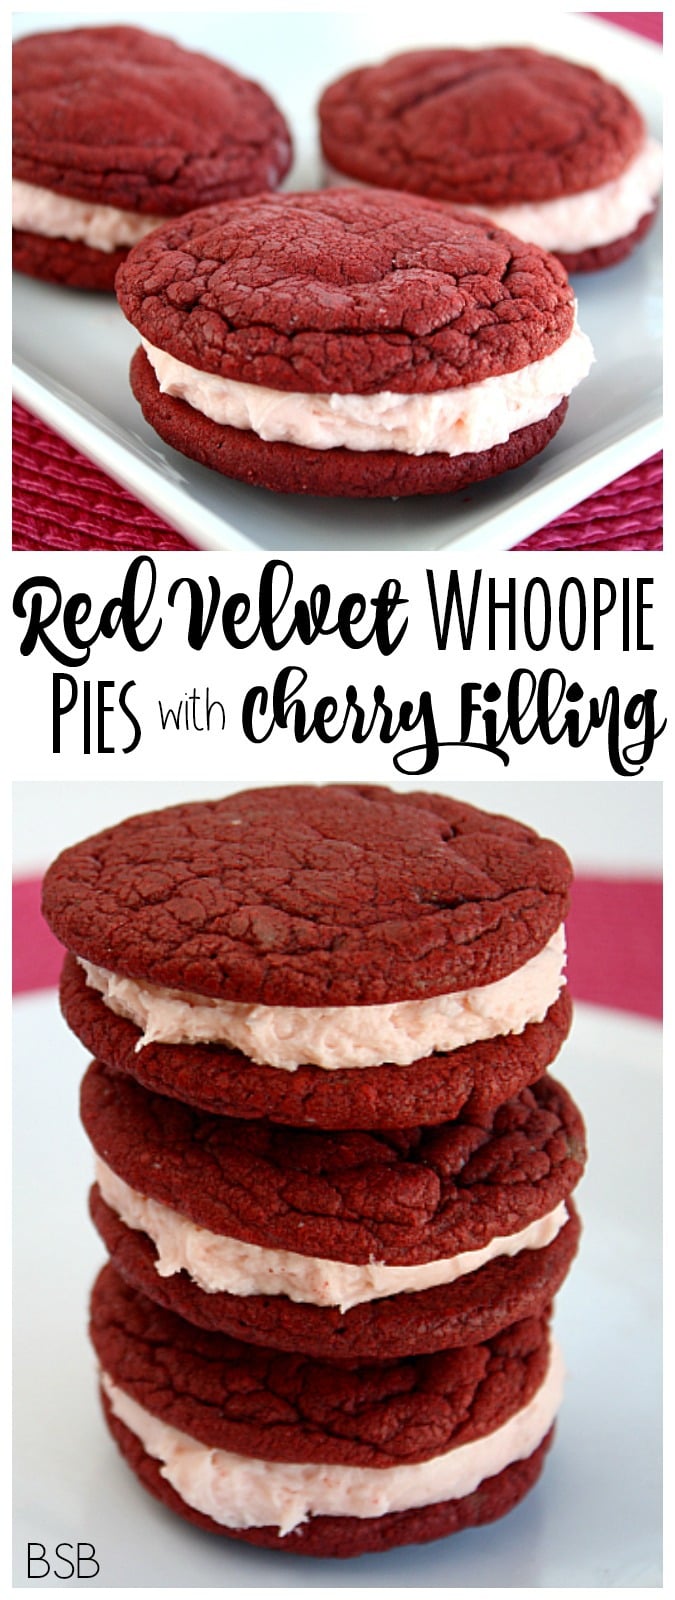 These red velvet whoopie pies with marshmallow filling are an easy and delicious treat. With the cherry marshmallow filling, they add a touch of flavor and romance, making them perfect for Valentine’s Day!